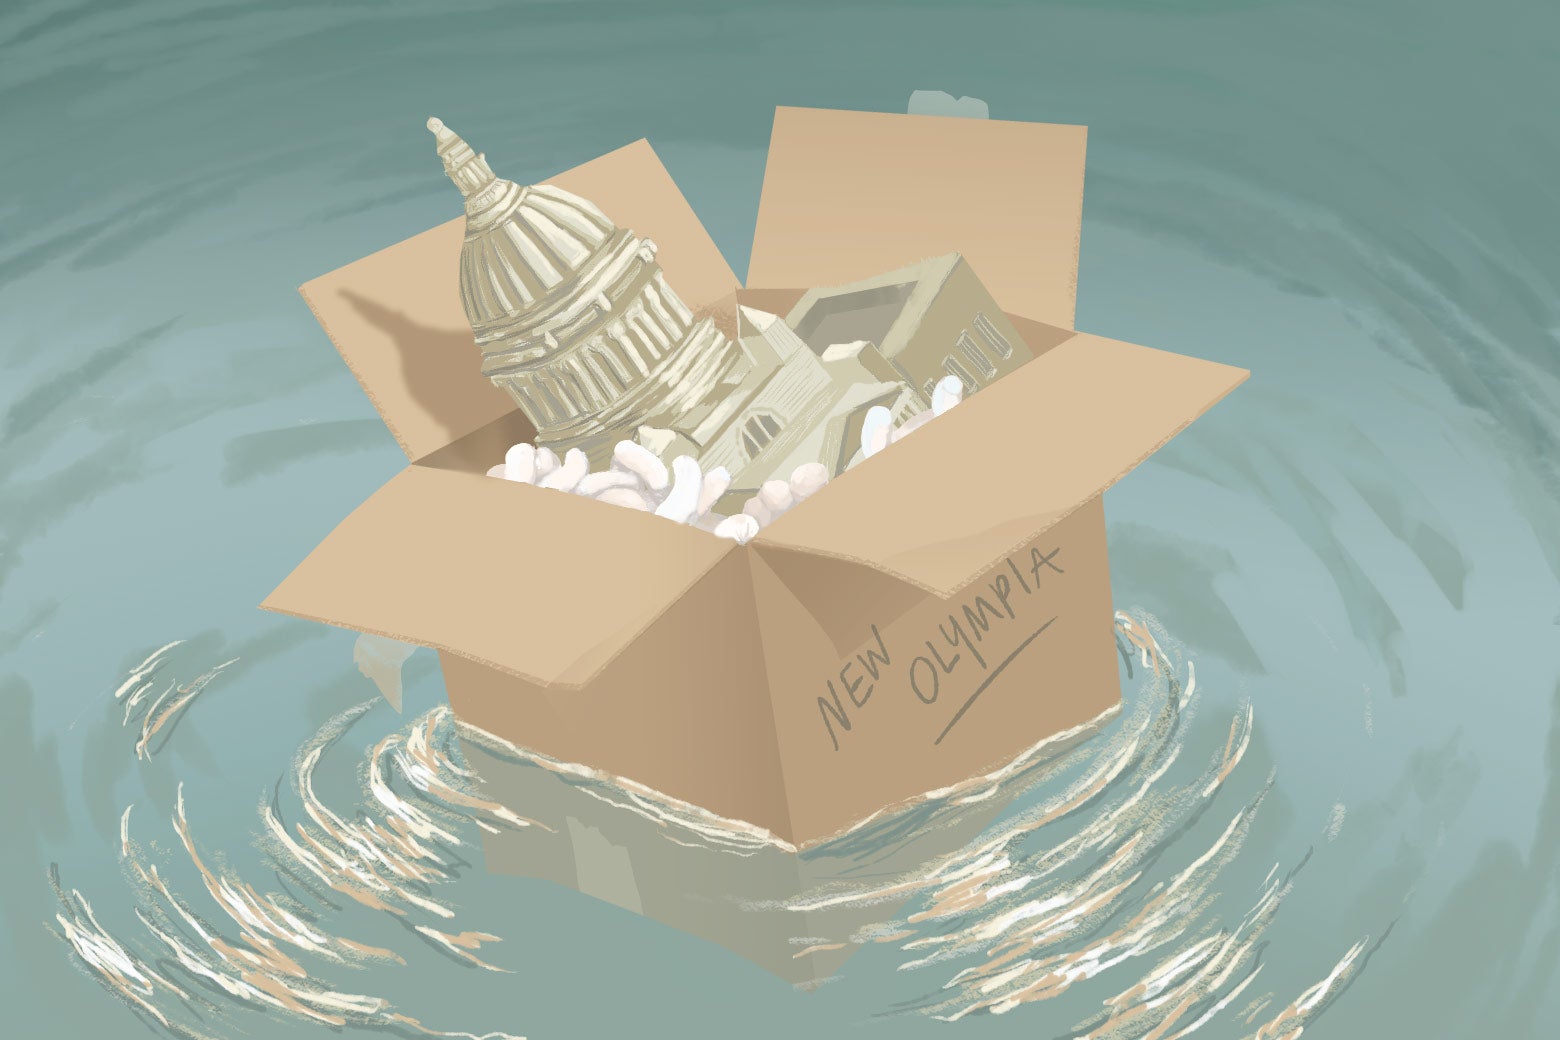 A cardboard box labeled New Olympia and filled with packing peanuts and a model of a state capitol floats in water